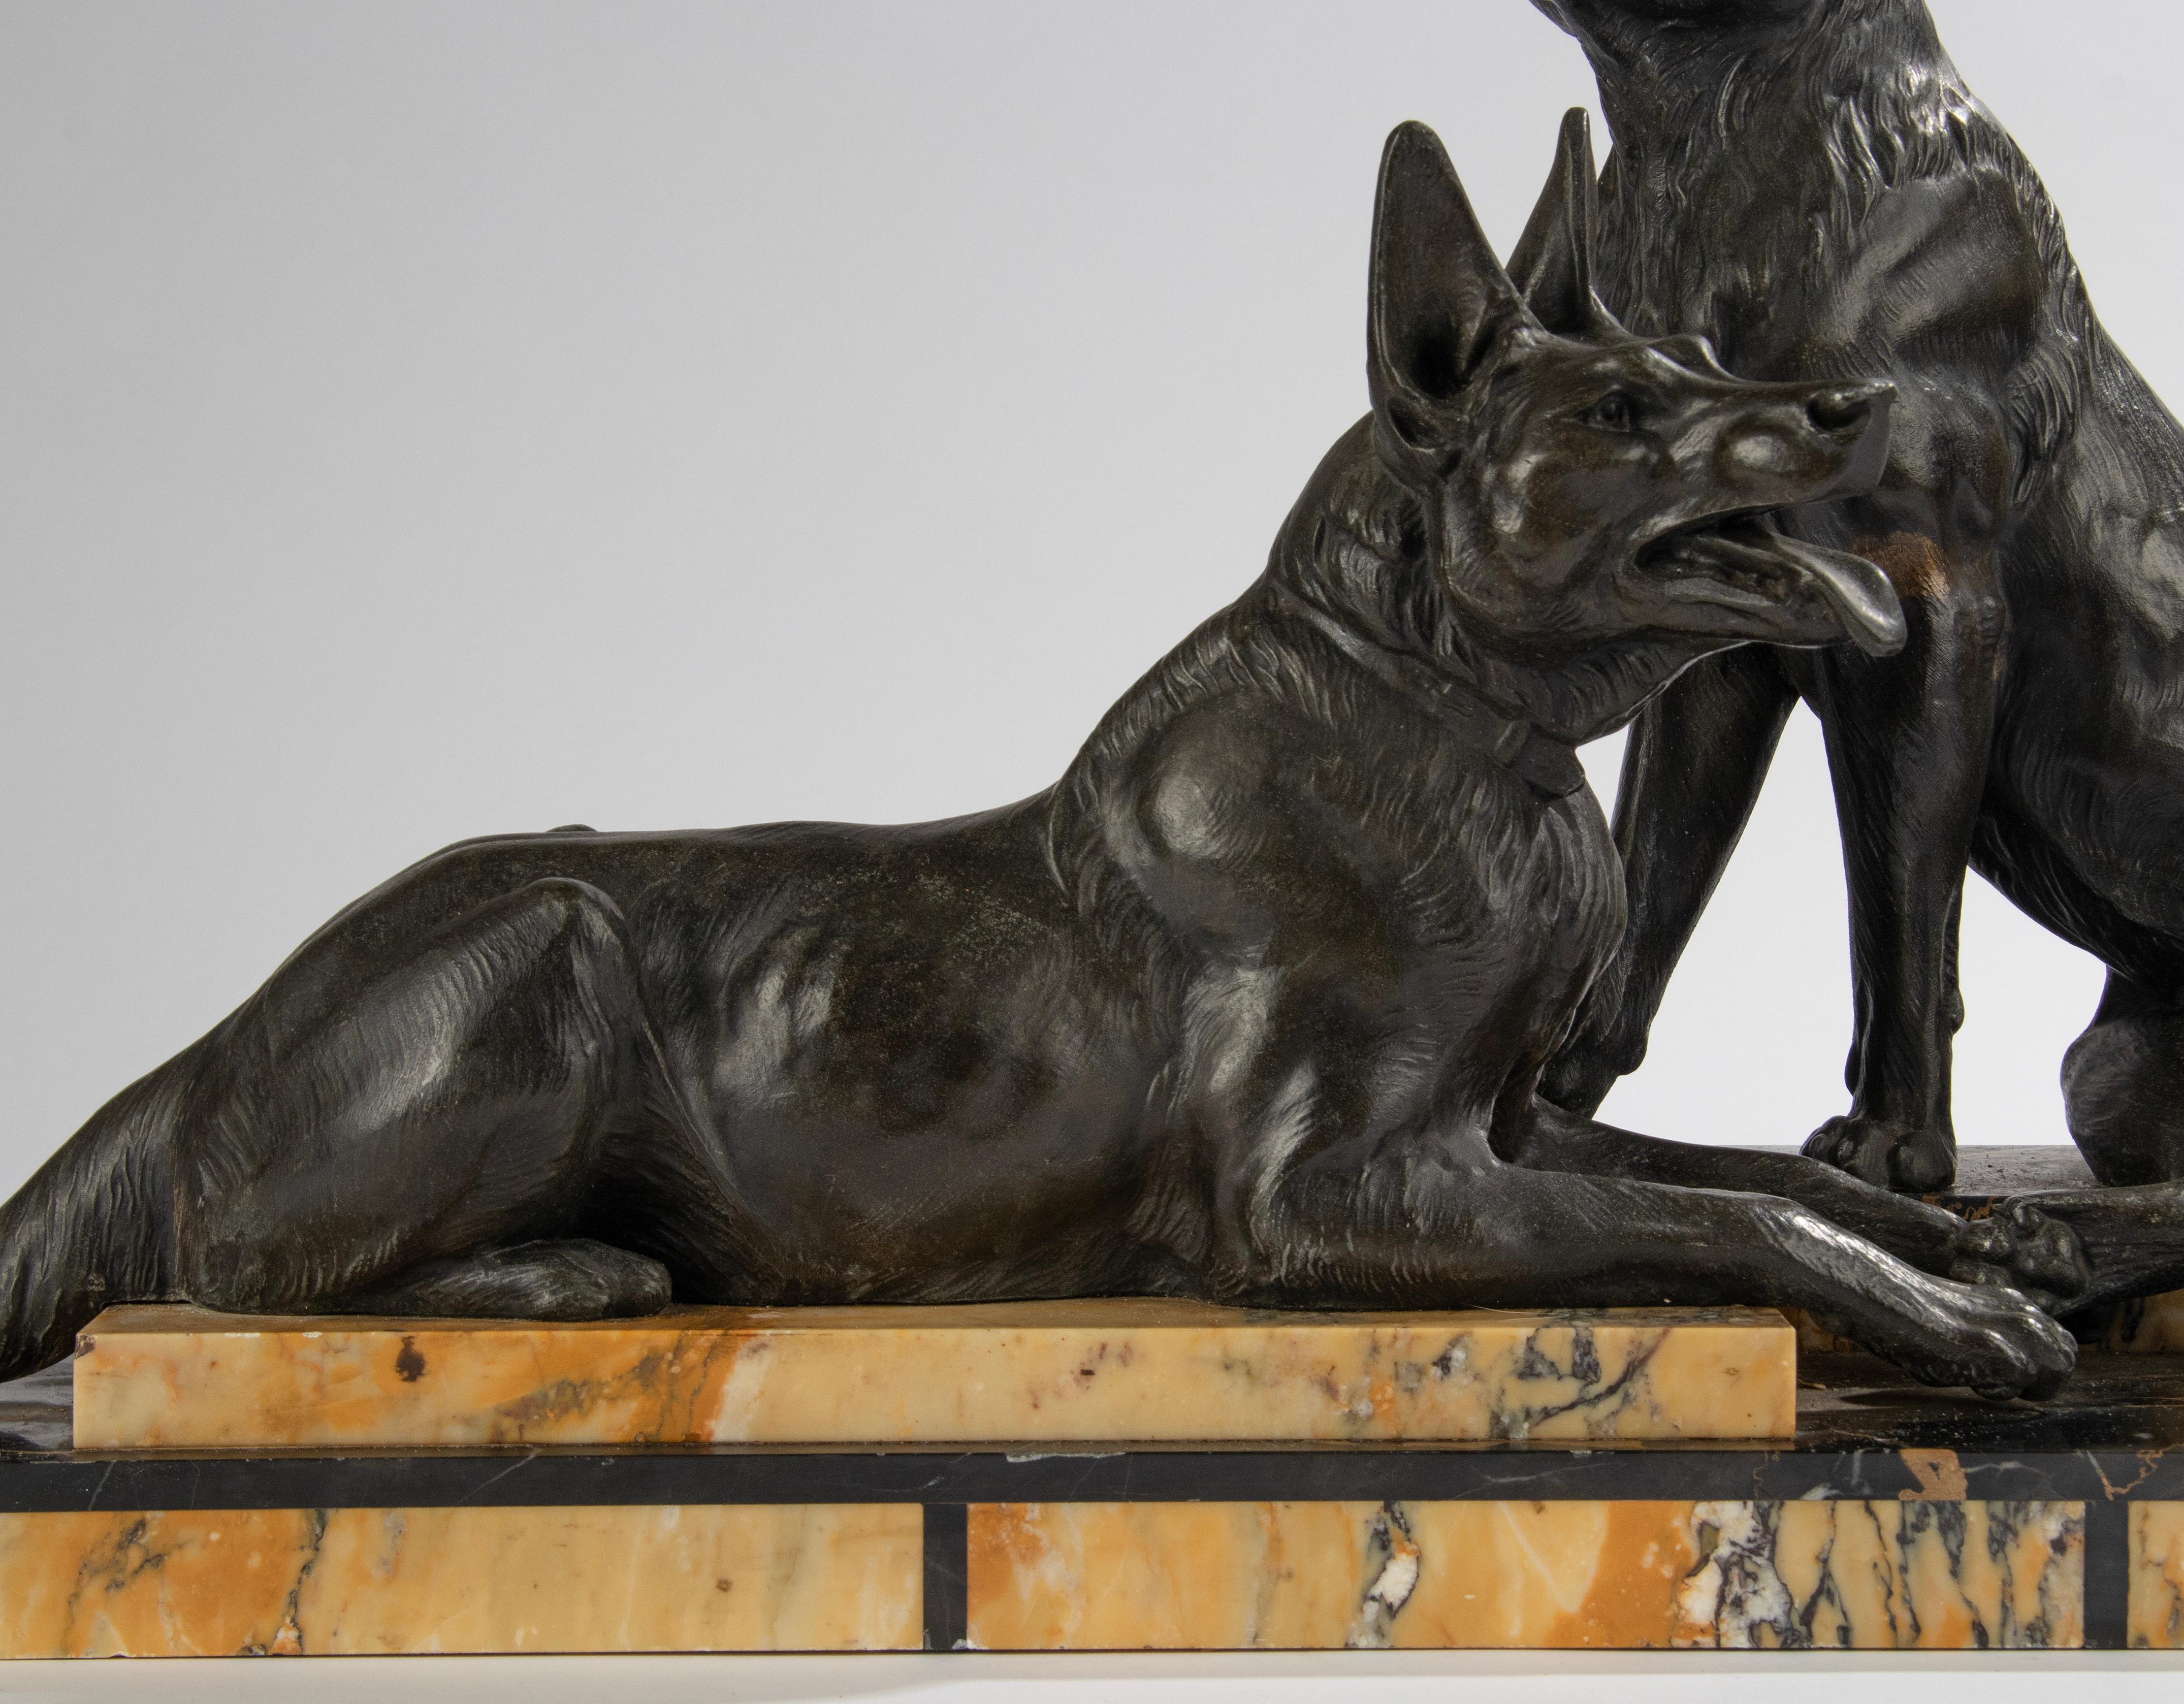 Early 20th Century Art Deco Period Sculpture of German or Belgian Sheppards by Louis Carvin For Sale